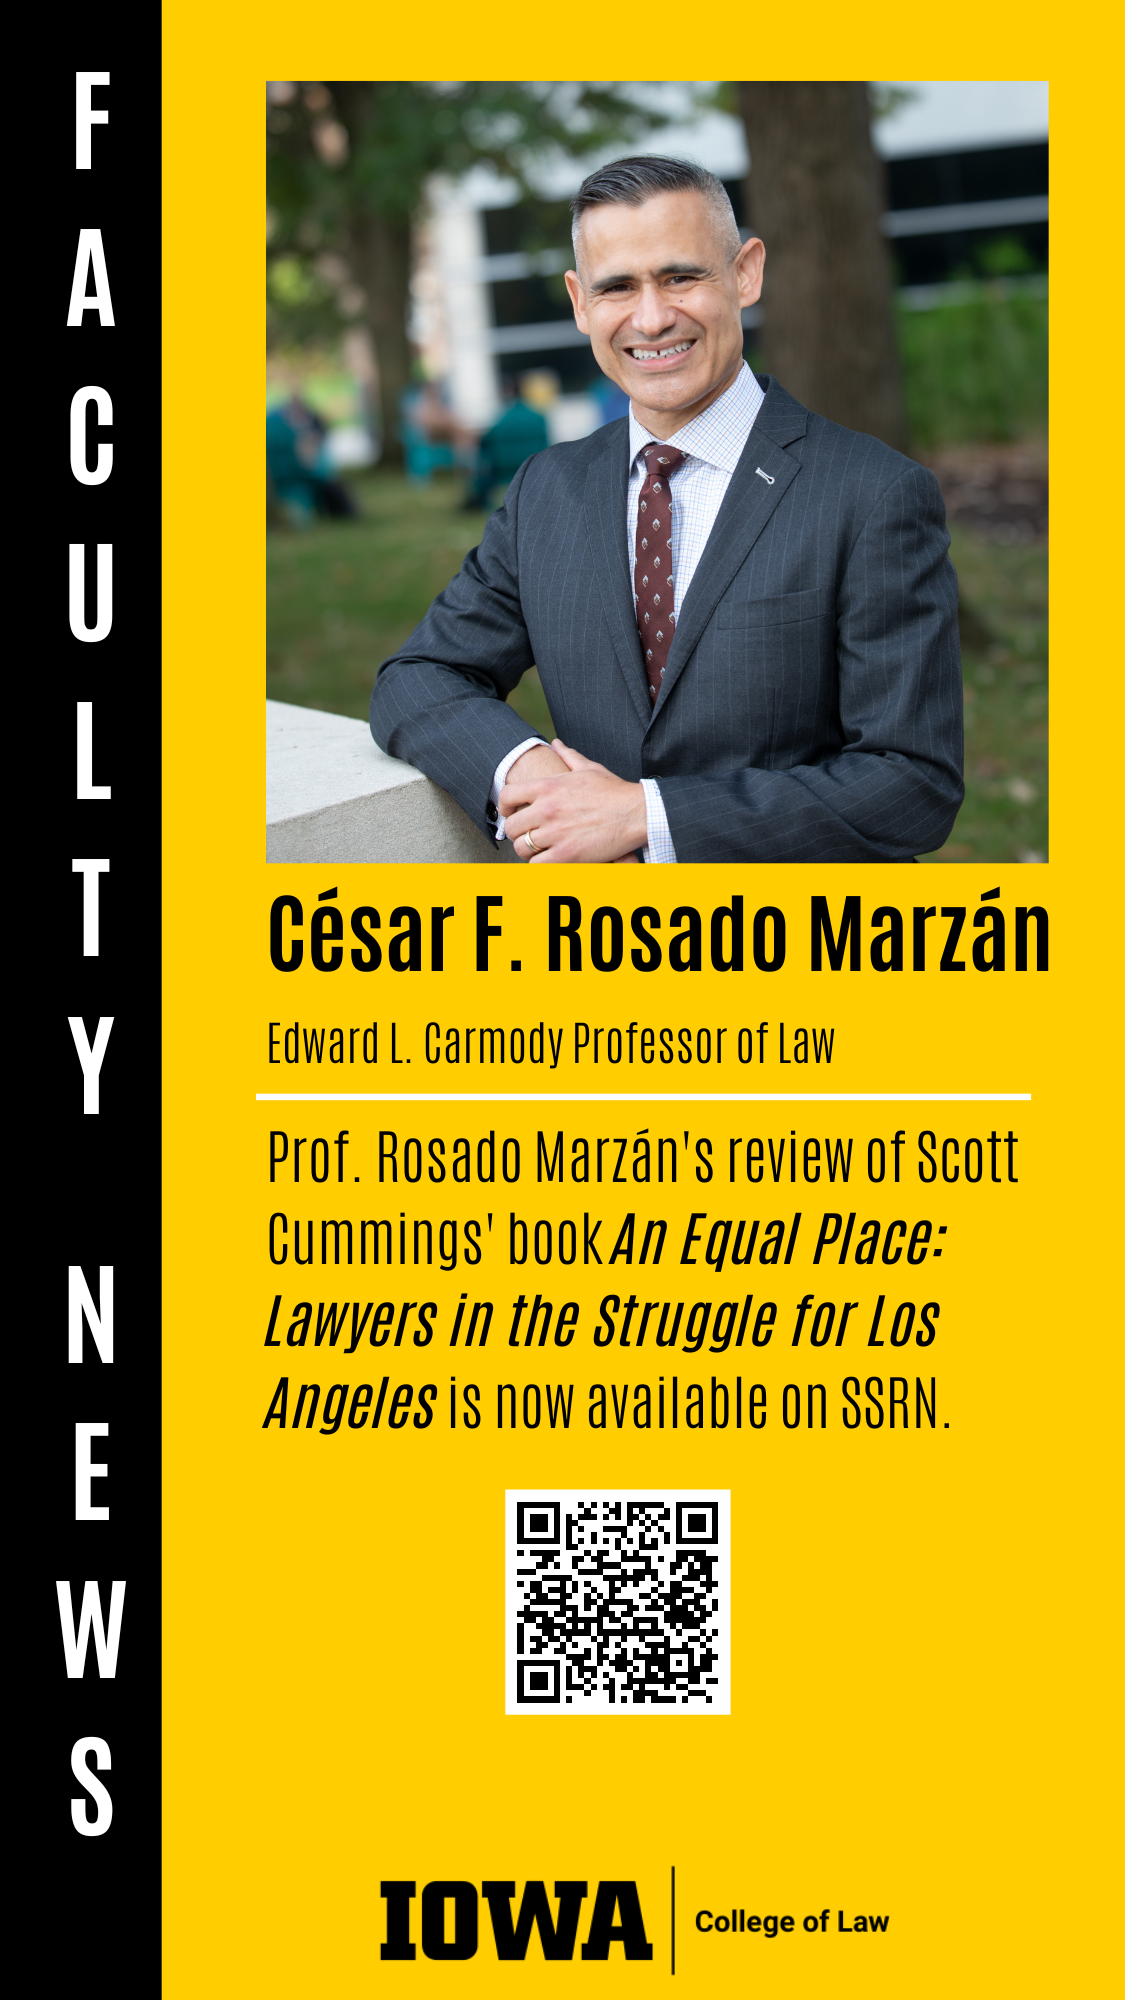 Edward L. Carmody Professor of Law Prof. Rosado Marzán's review of Scott Cummings' book An Equal Place: Lawyers in the Struggle for Los Angeles is now available on SSRN. César F. Rosado Marzán